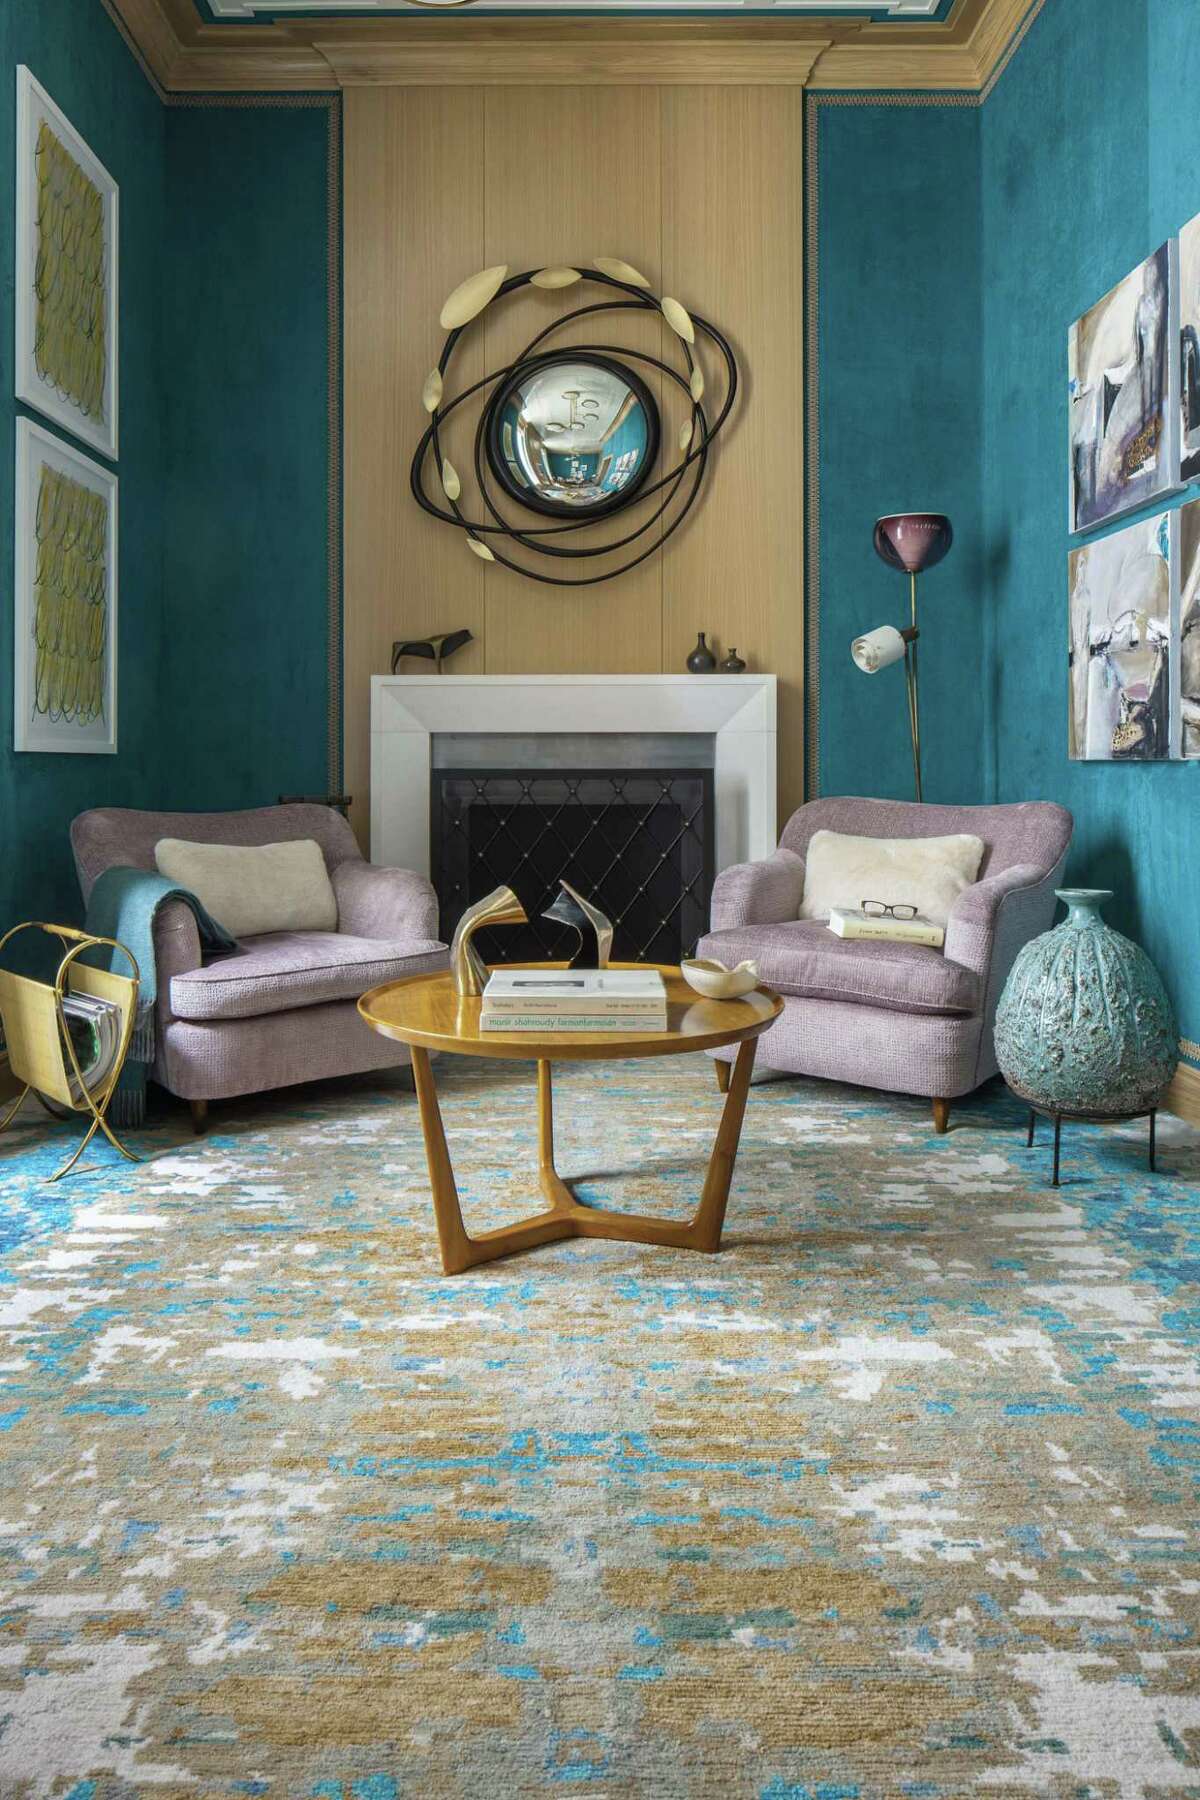 The contemporary collection of rugs by Stark features several abstract, colorful patterns such as the one above from the Nair collection, or below, from their Fractra line.